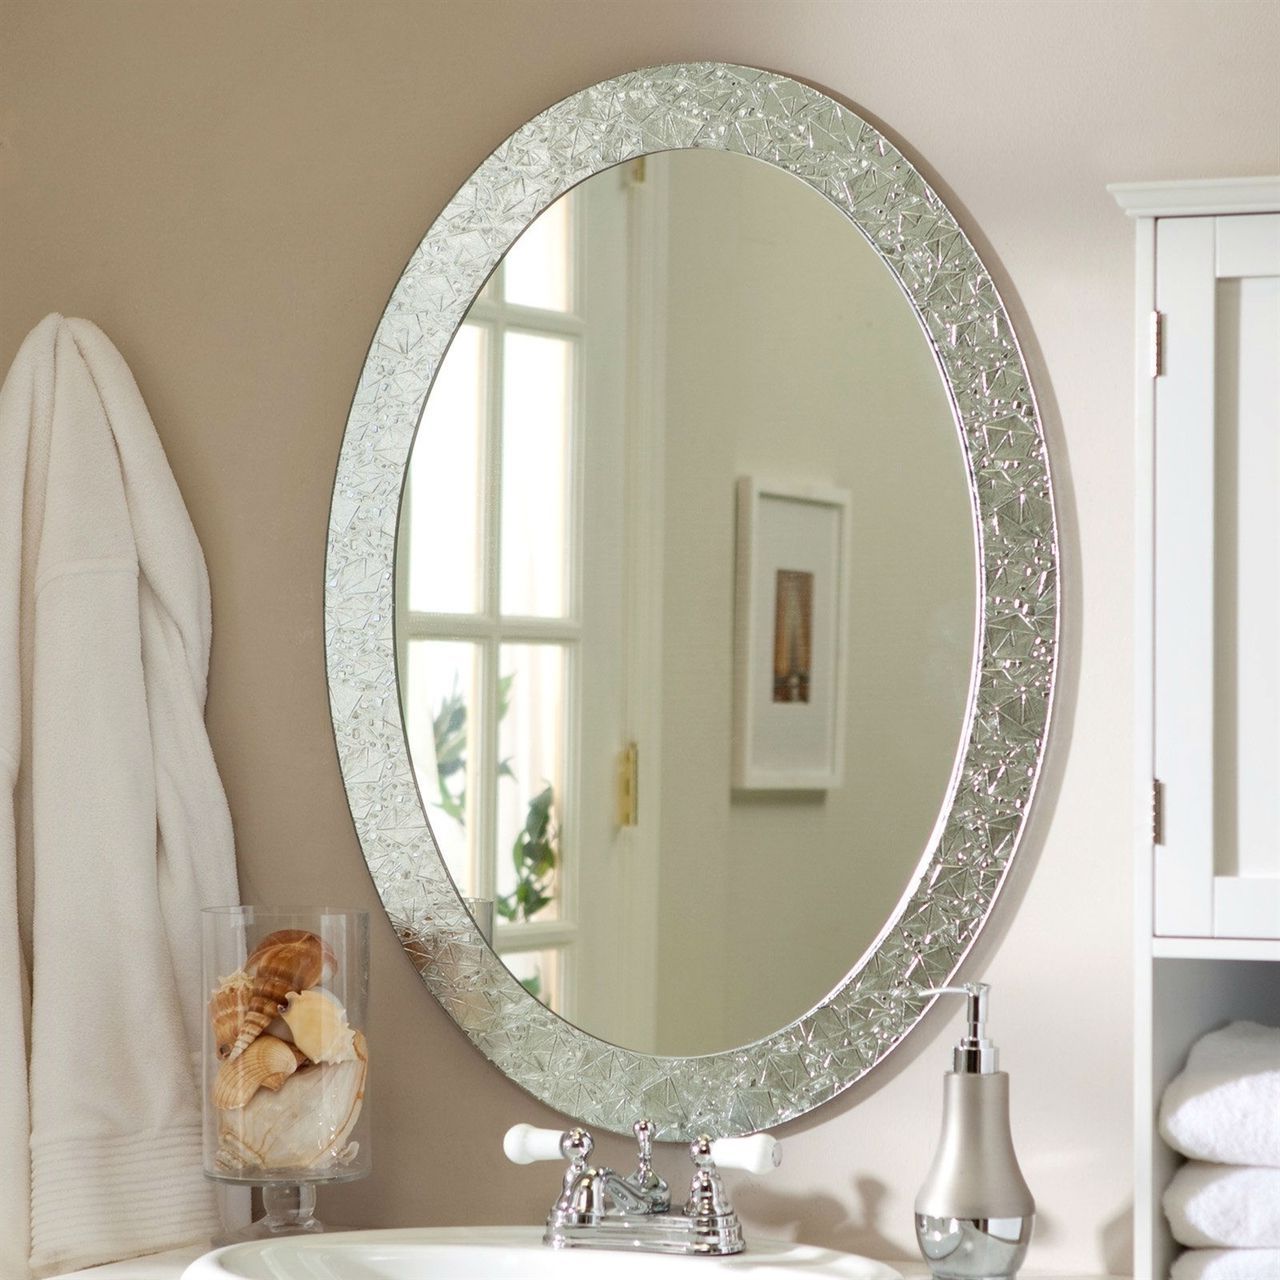 Home Goods Wall Mirrors Within Fashionable Oval Frame Less Bathroom Vanity Wall Mirror Elegant Crystal Border (View 20 of 20)